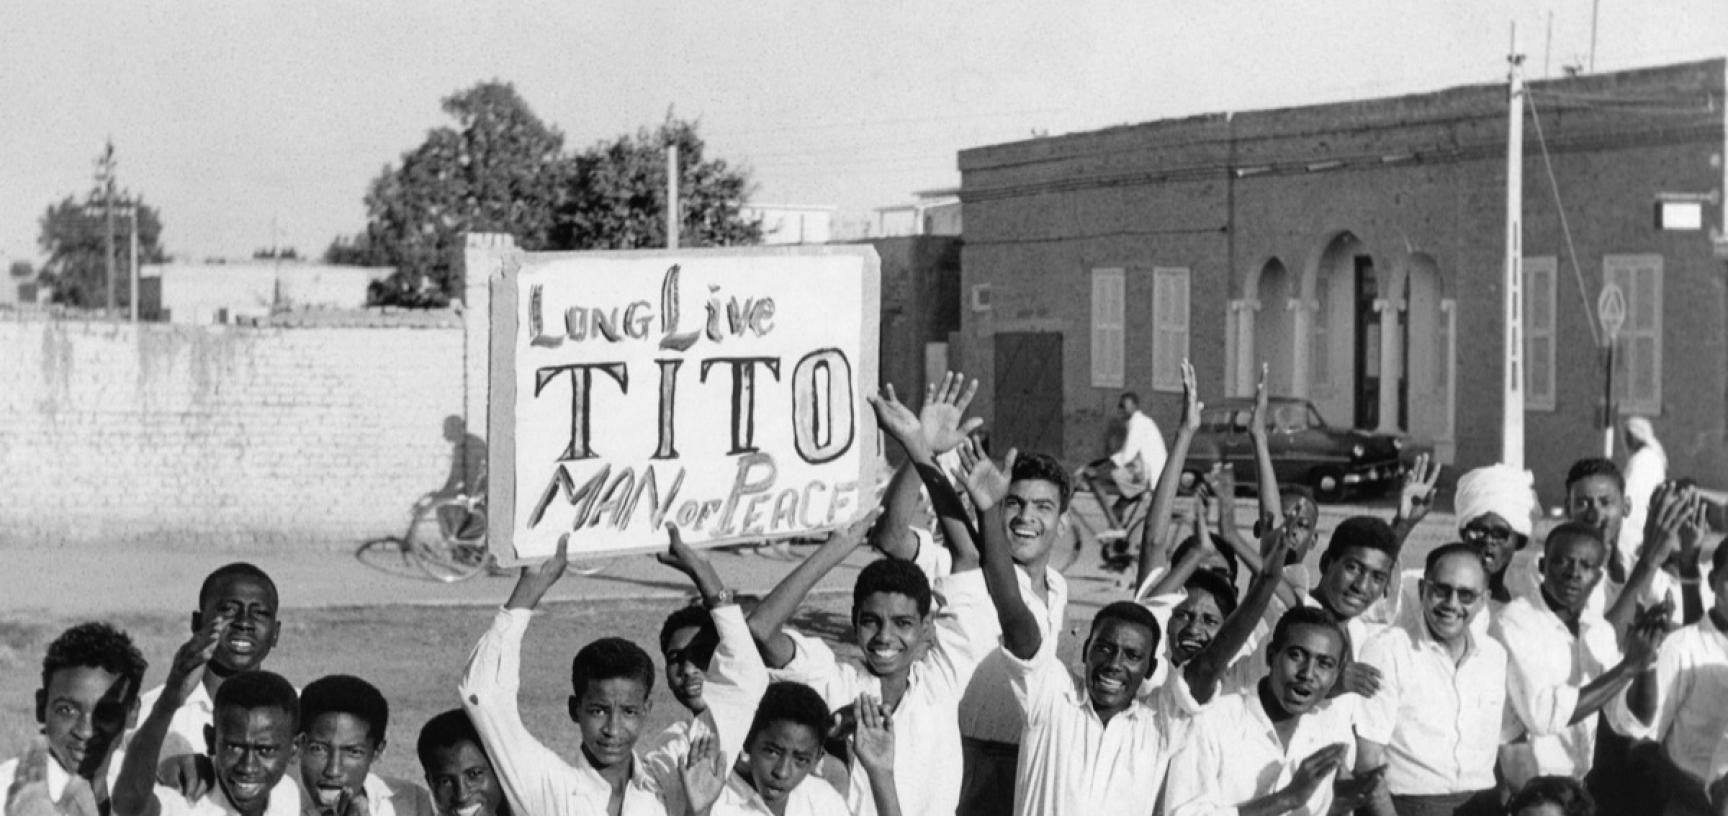 Sudan, 1959. The people gathered to welcome President Tito in Barakat. (Copyright Museum of Yugoslavia, Belgrade)